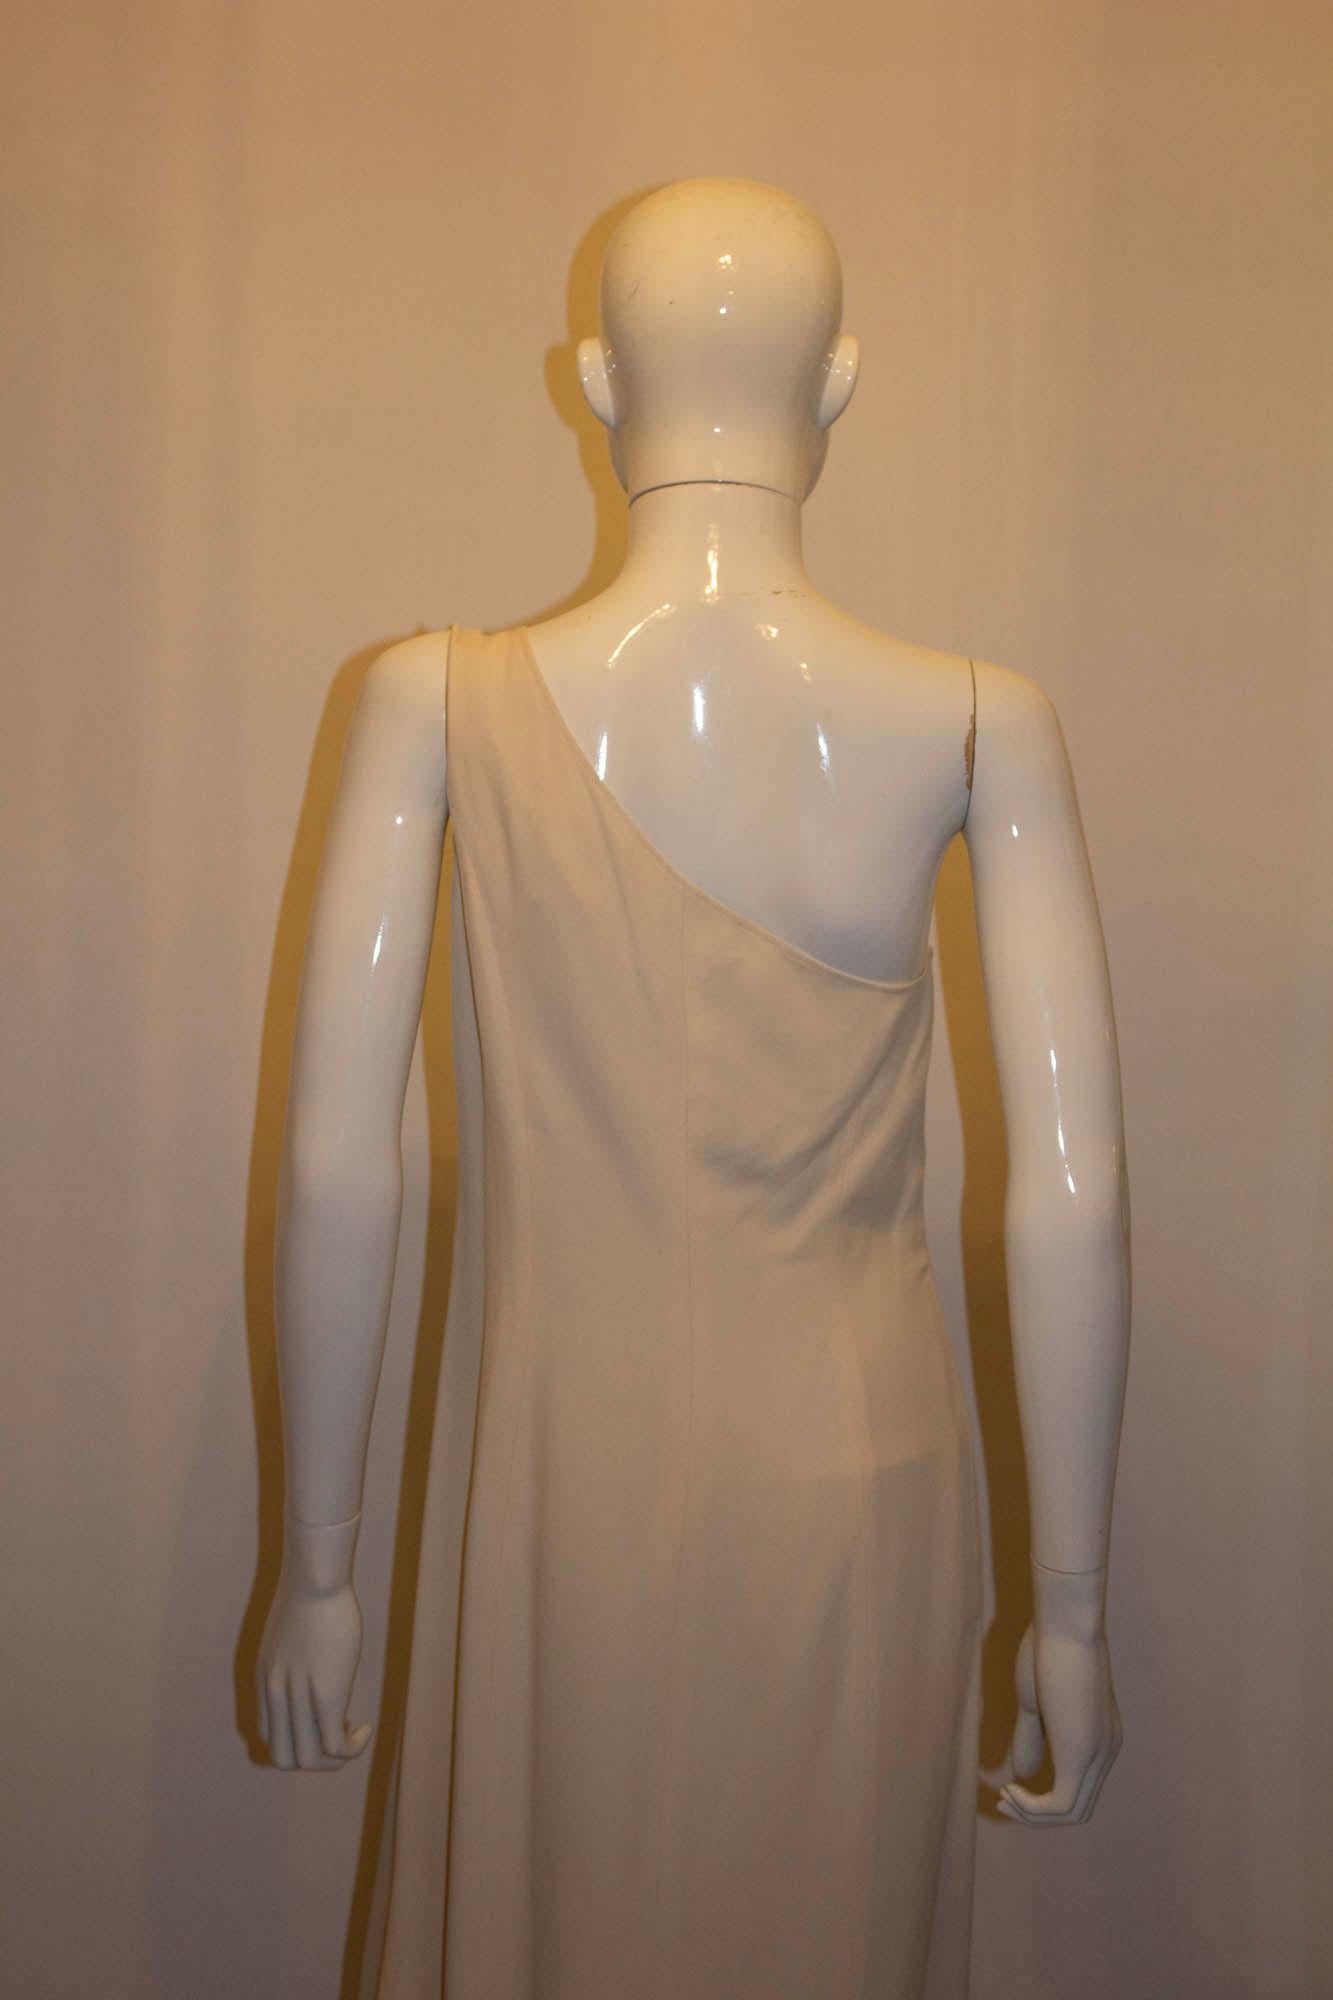 A chic and edgy vintage crepe dress by Claude Montana. The dress has one shoulder, is fully lined and has a 25' slit at the front.  Made in Italy, size 42/8.
Measurements: Bust 36/7, length 54''